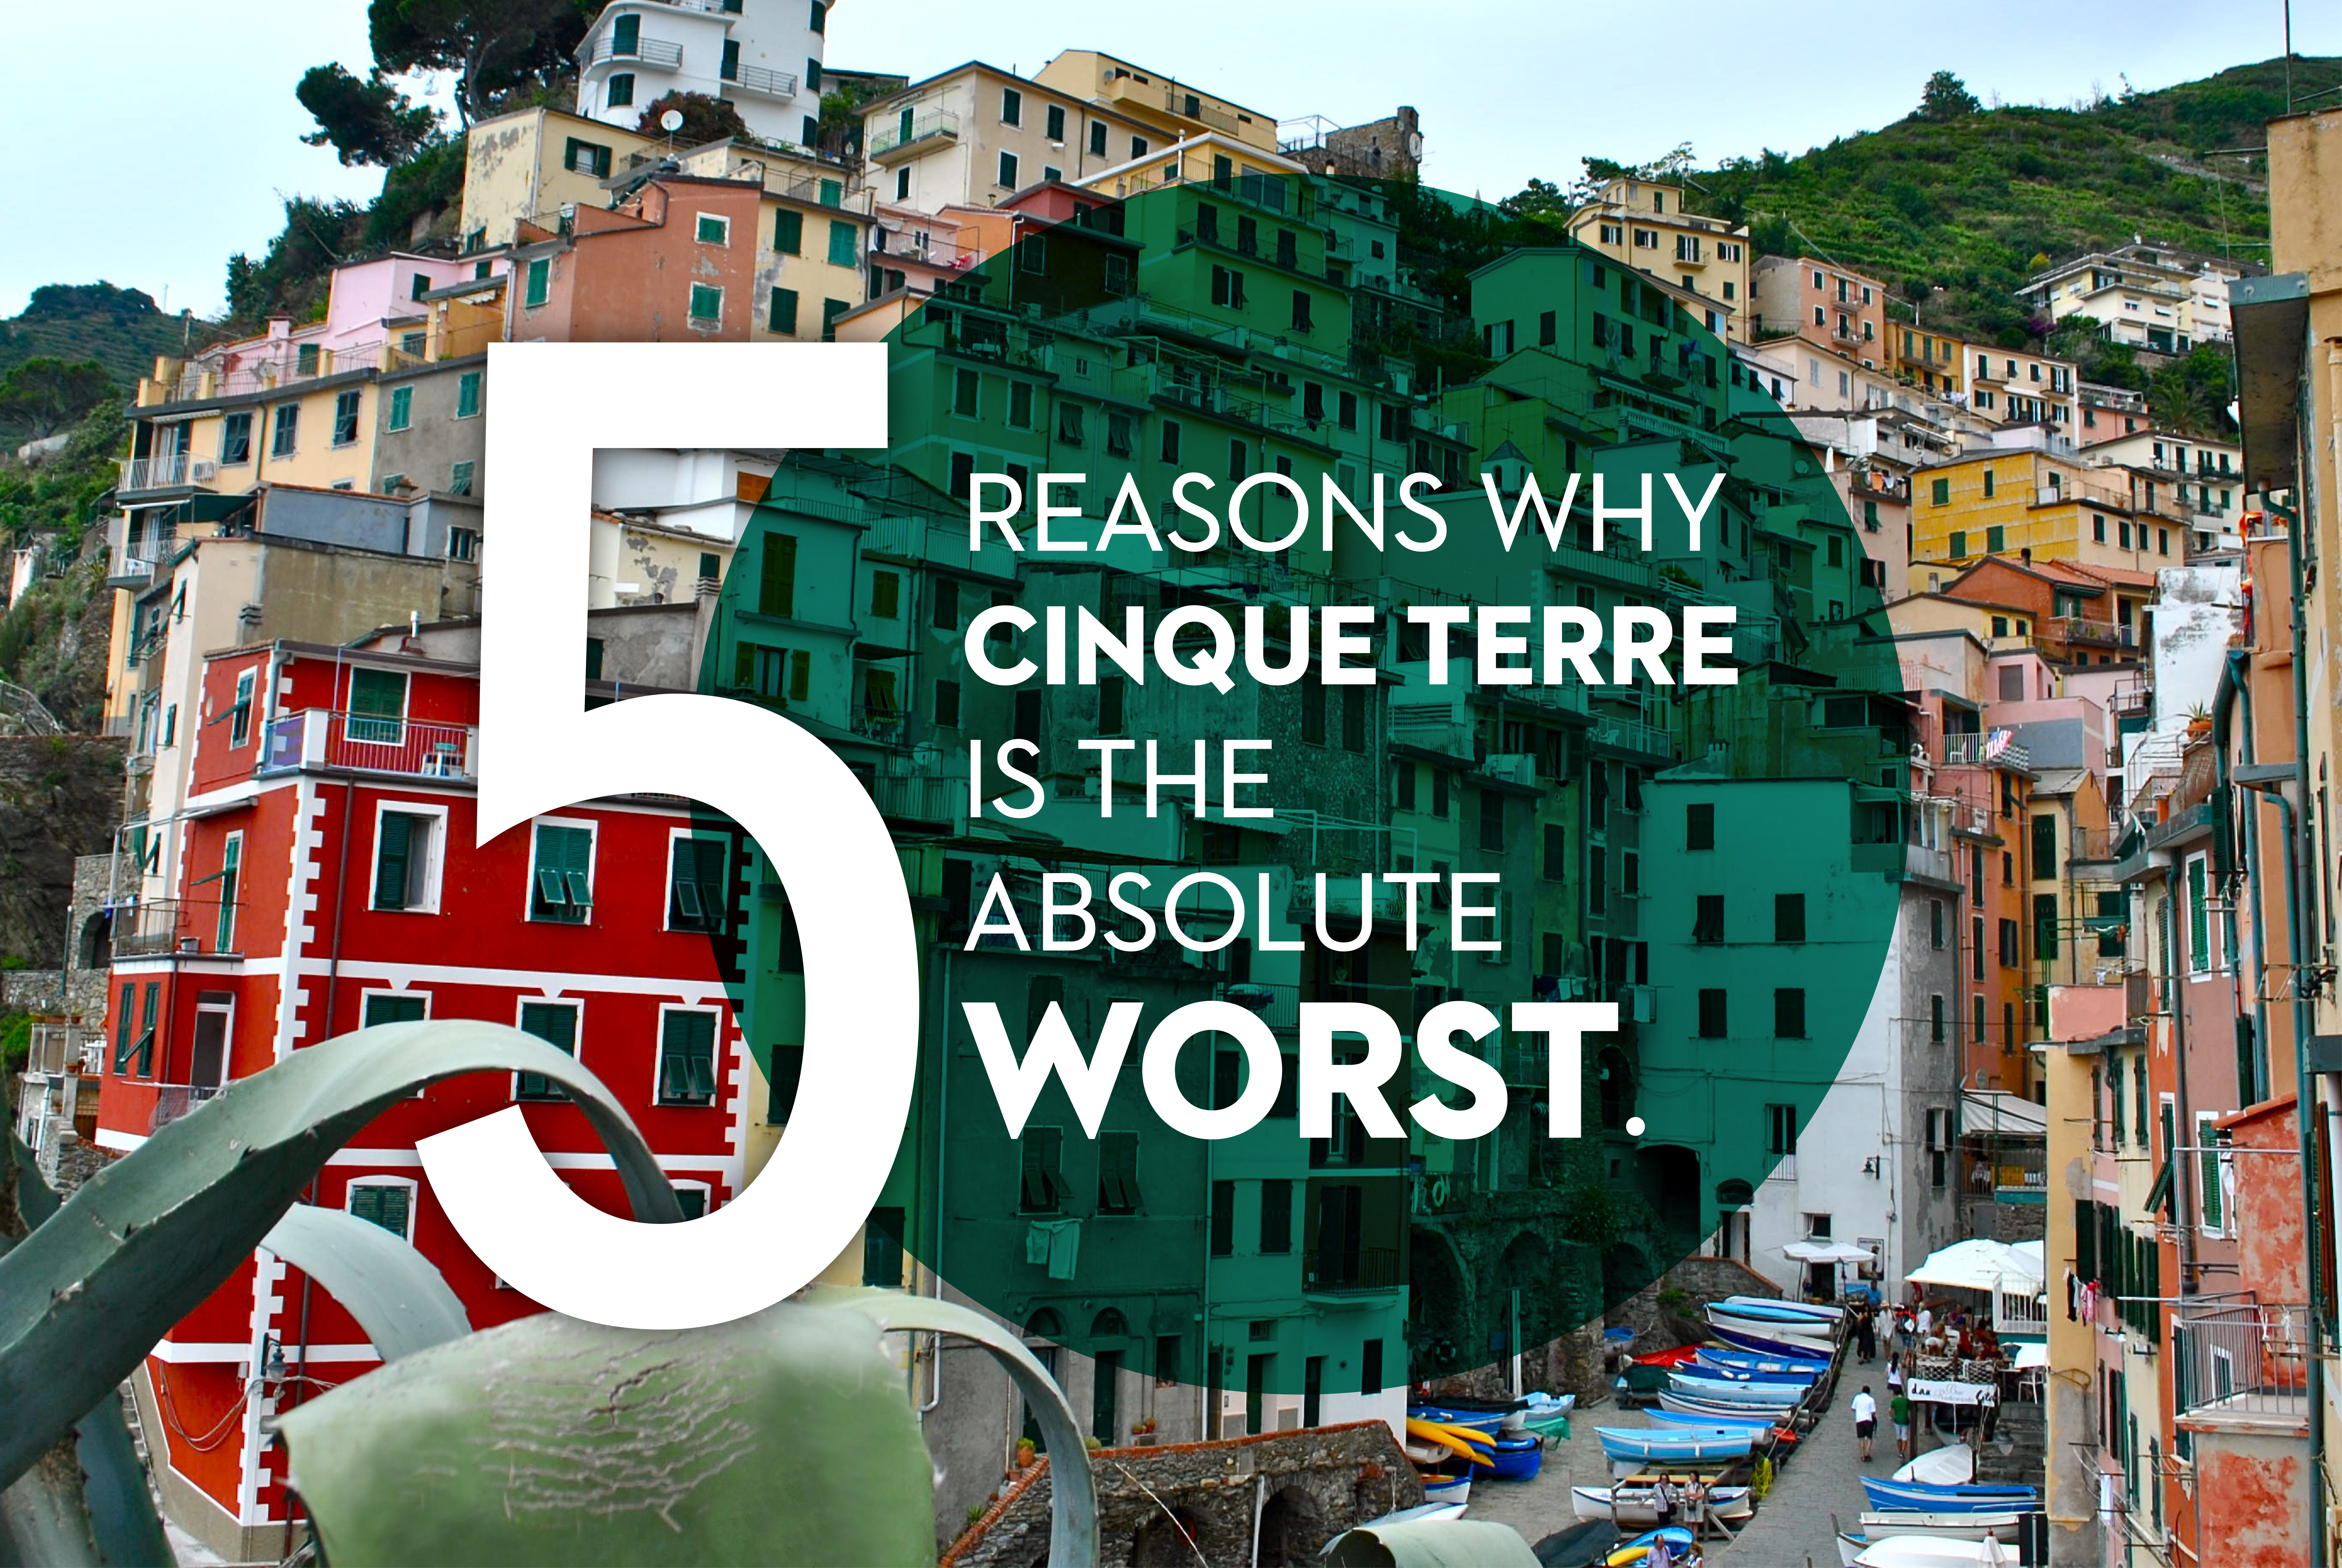 5 Reasons why Cinque Terre is the Absolute WORST.